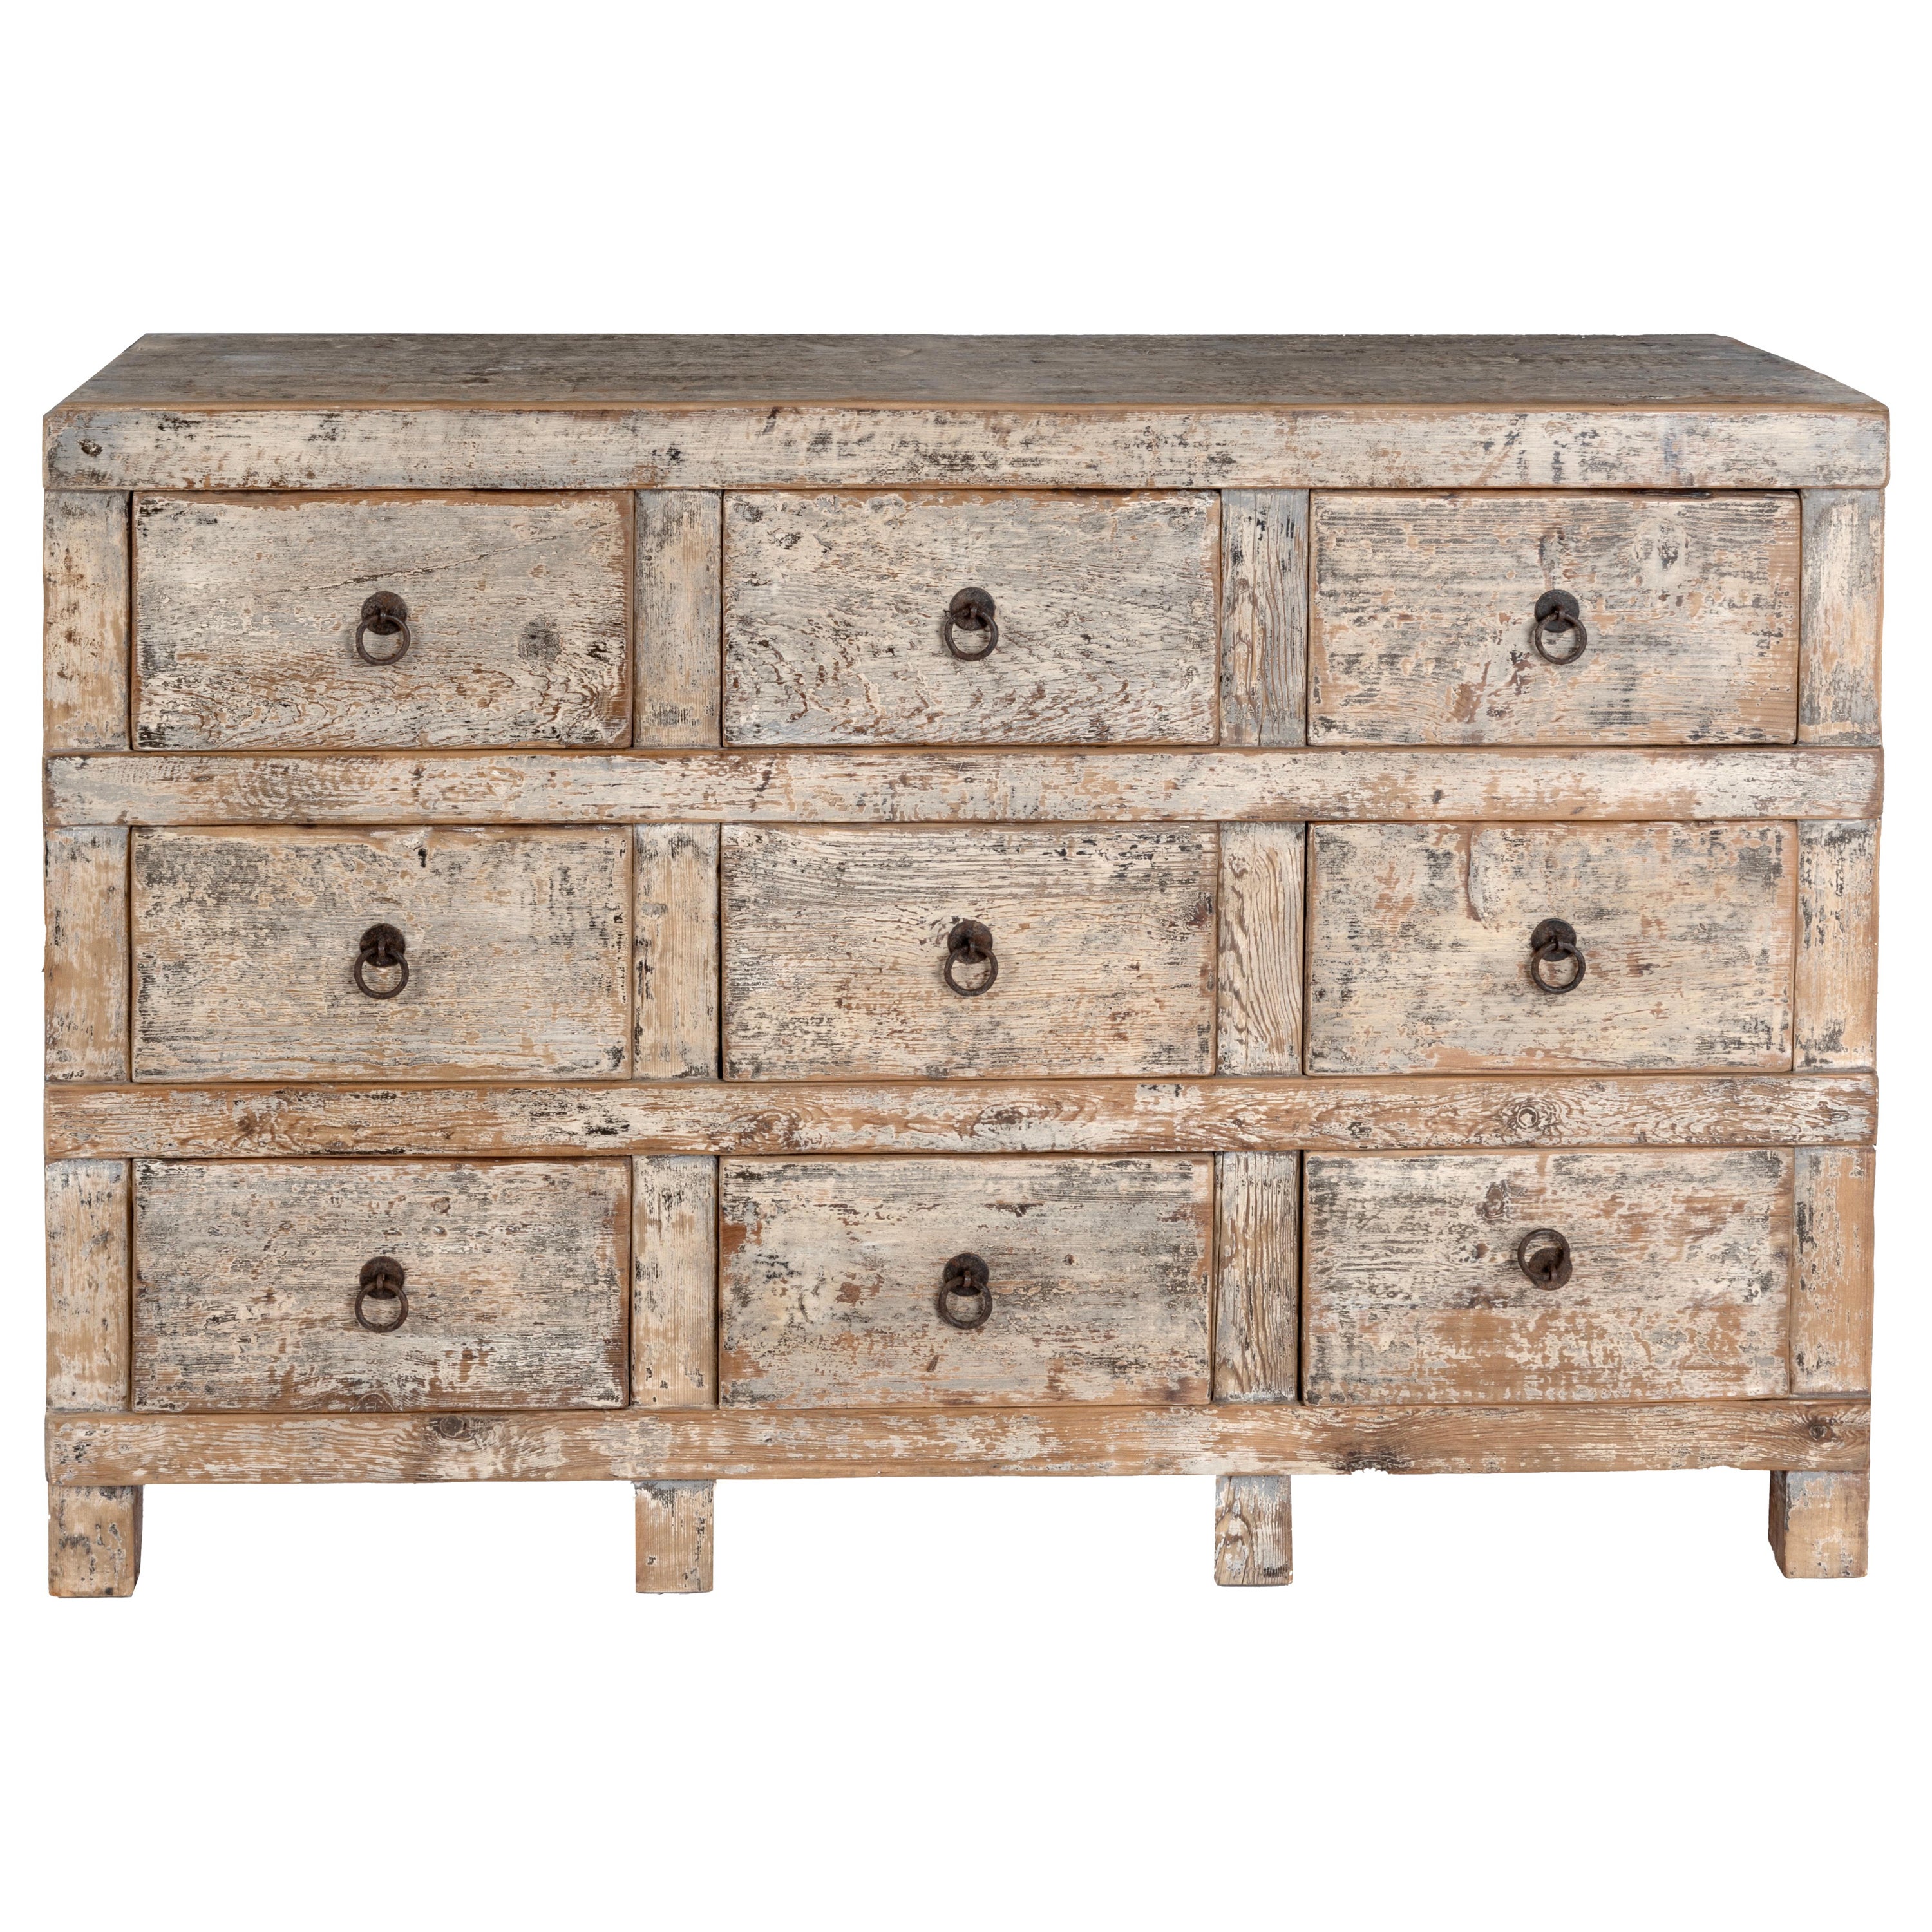 Nine Drawer Chest in Antiqued White Paint Patina 